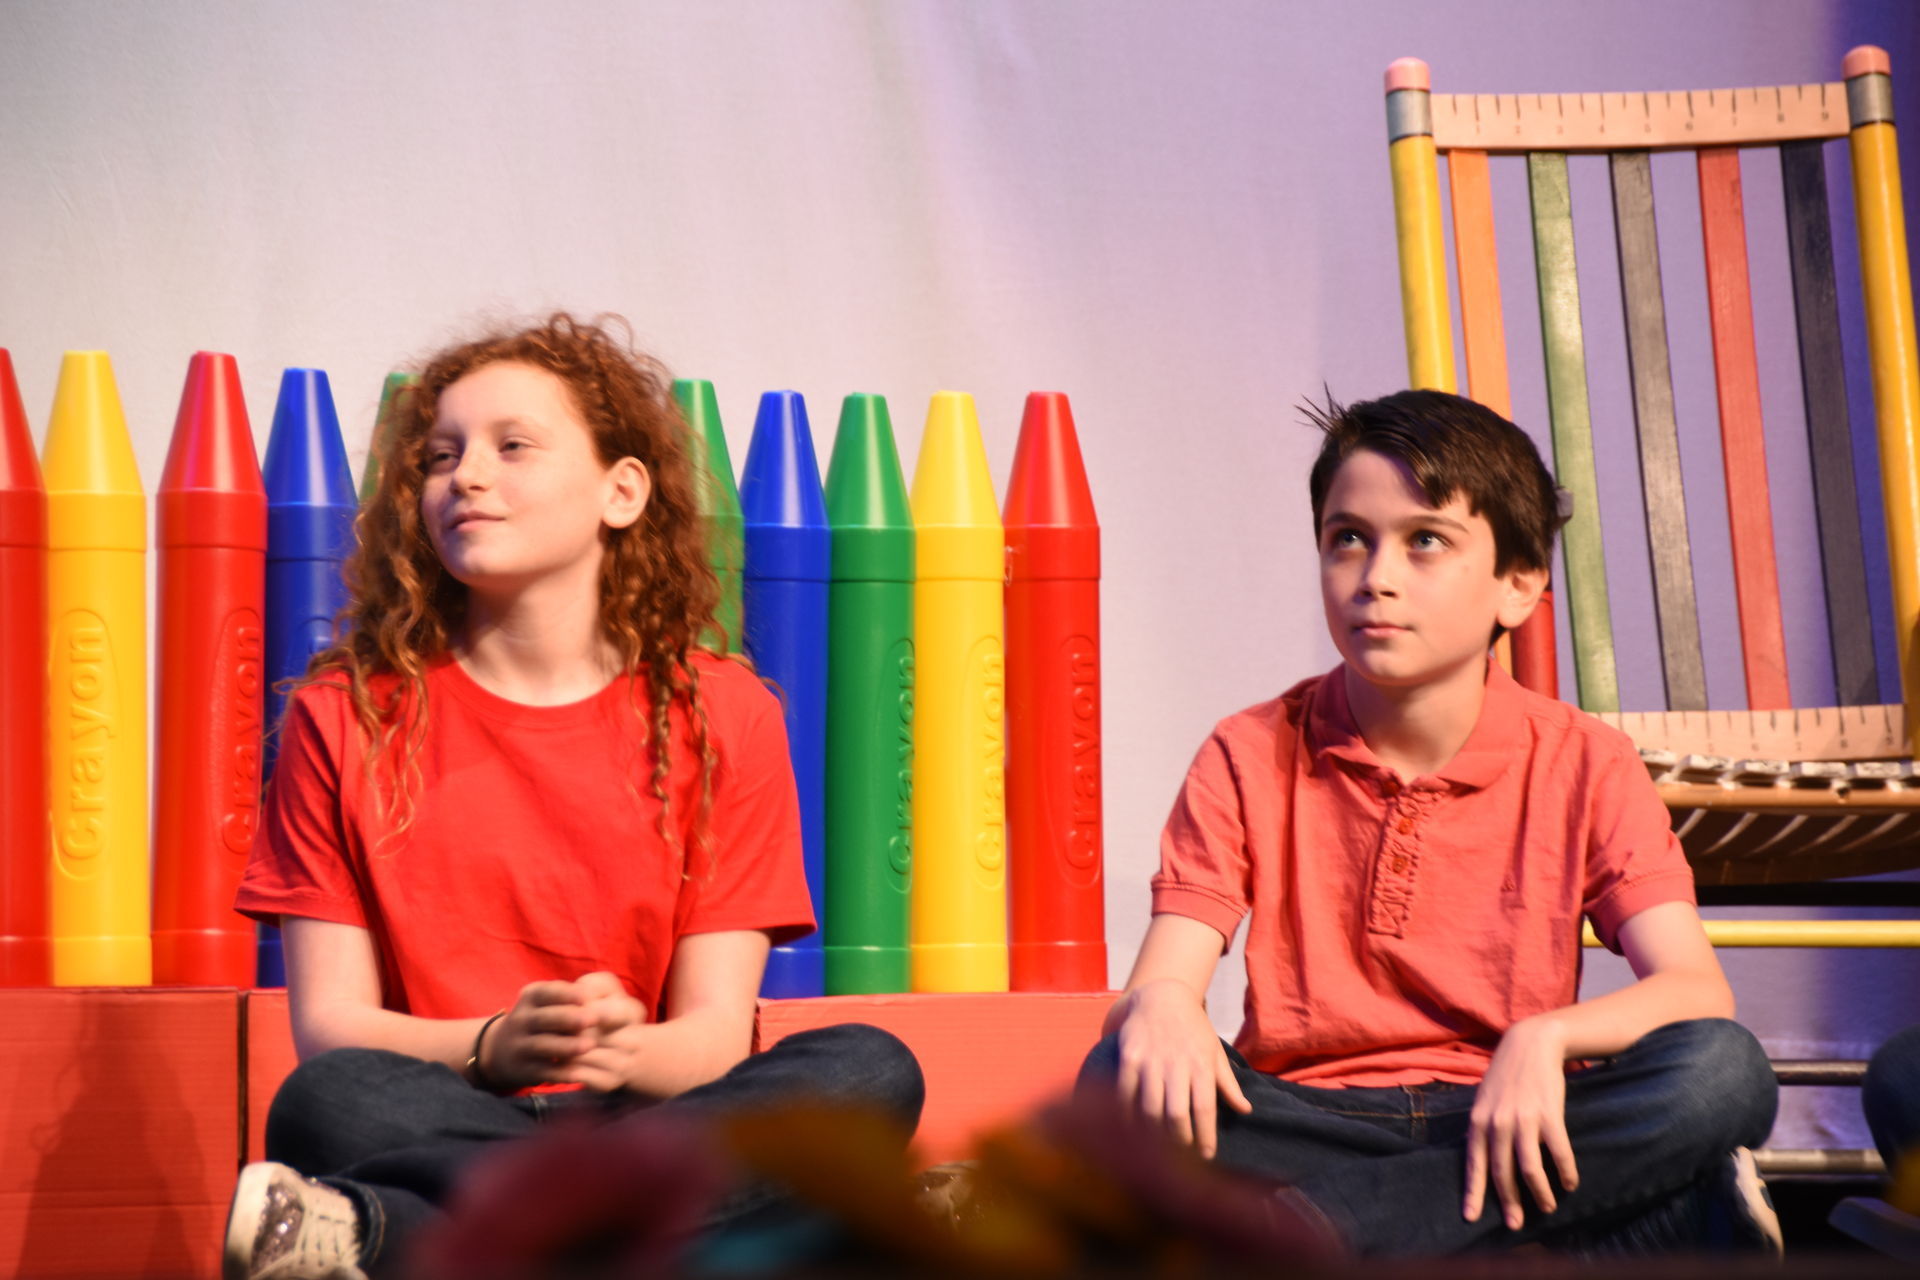 Two children seated in front of a crayon fence and a multicolored chair.